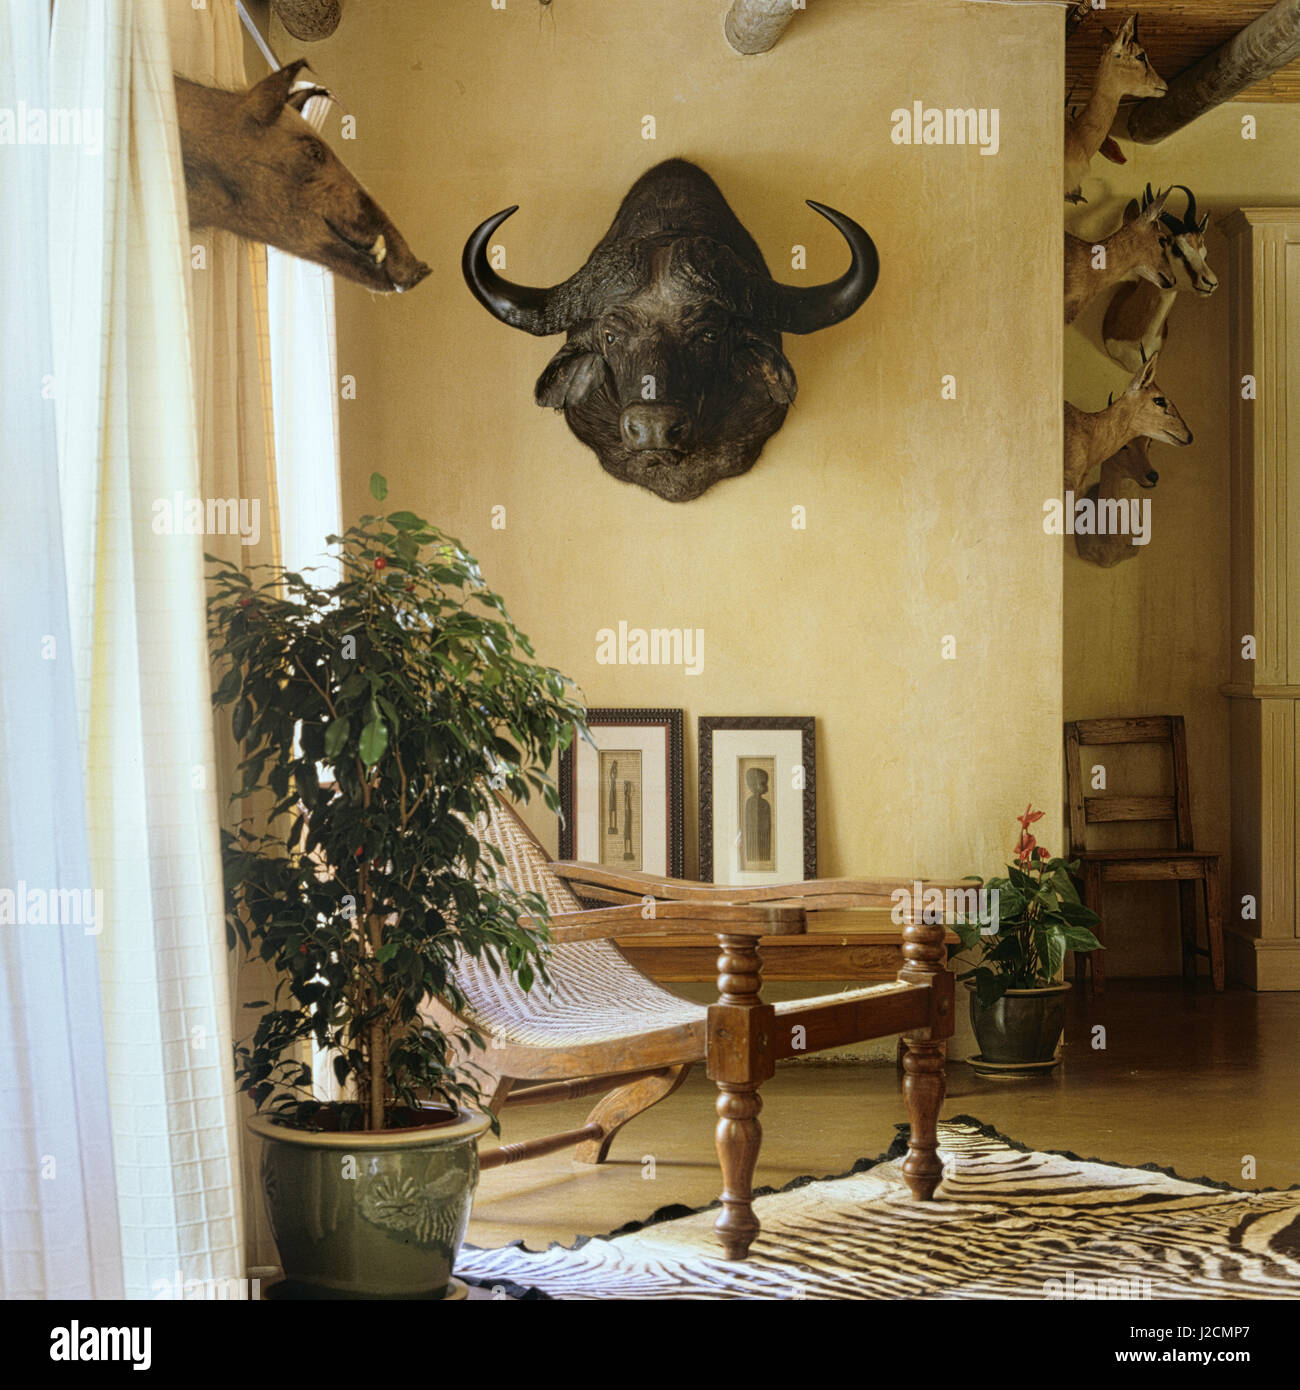 Animal heads hanging above recliner. Stock Photo